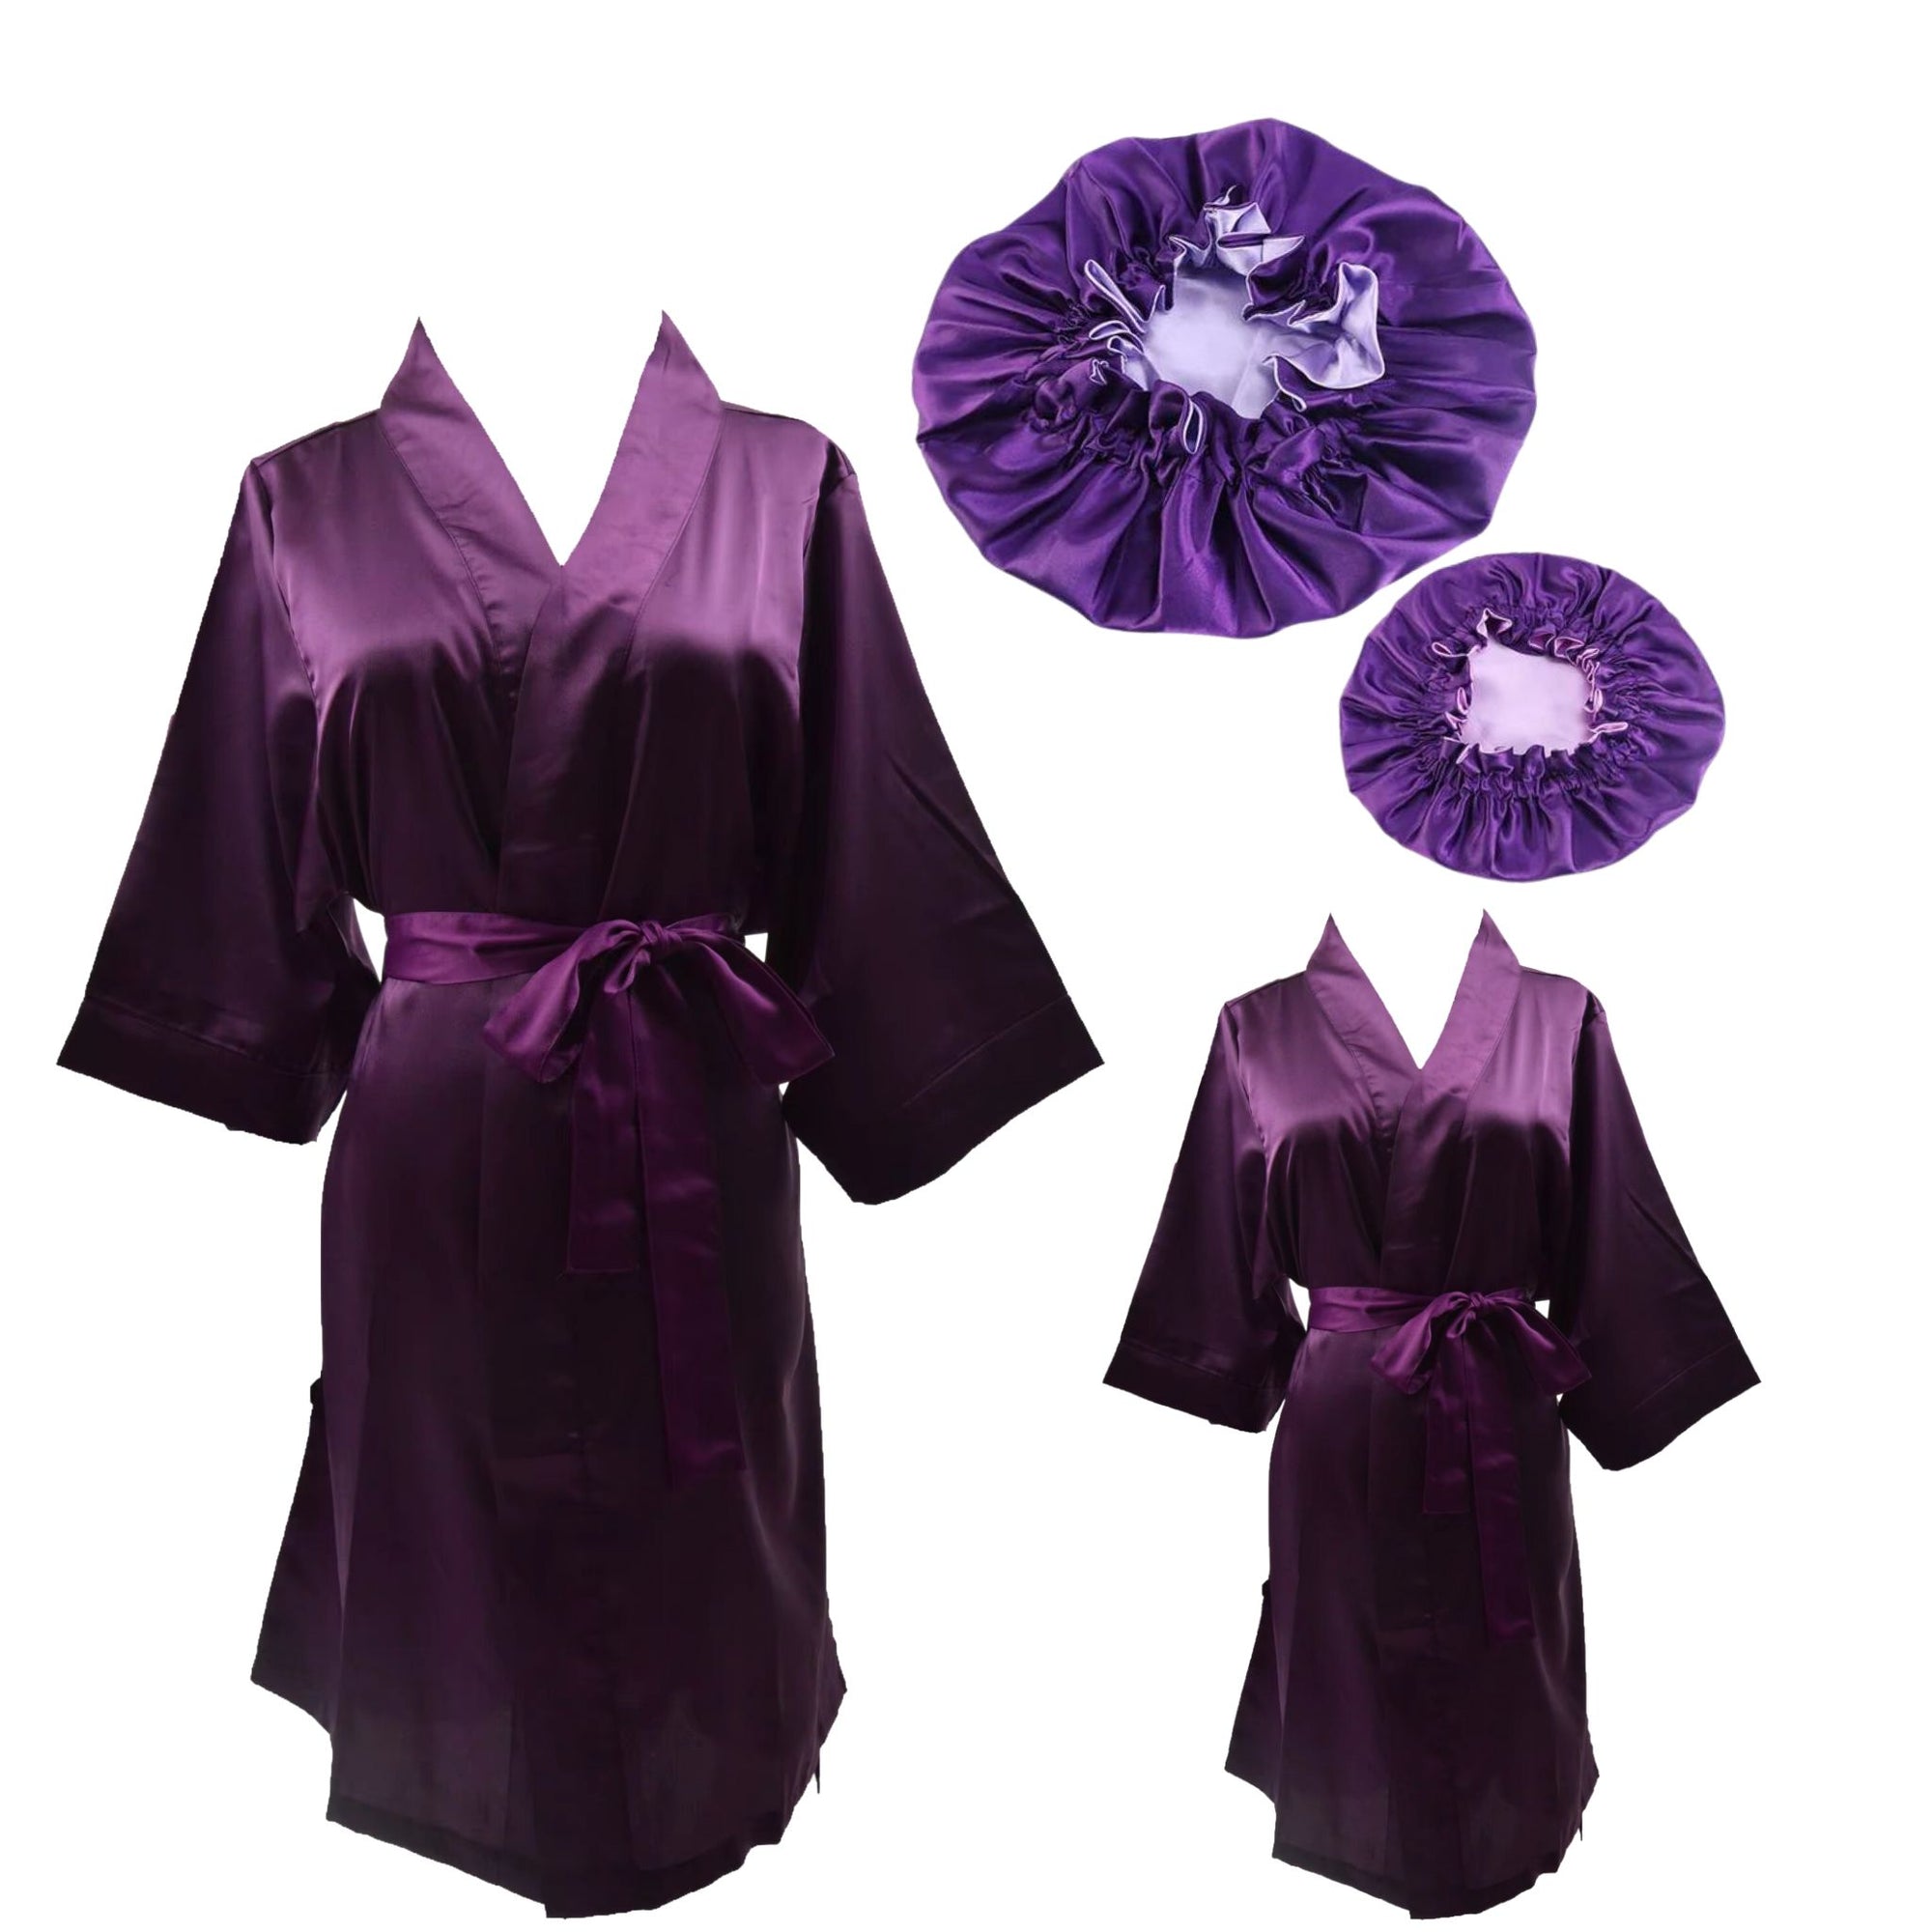 Mommy and me Purple Silky Satin Robes and matching Bonnets  | Mother daughter spa robes matching bonnets